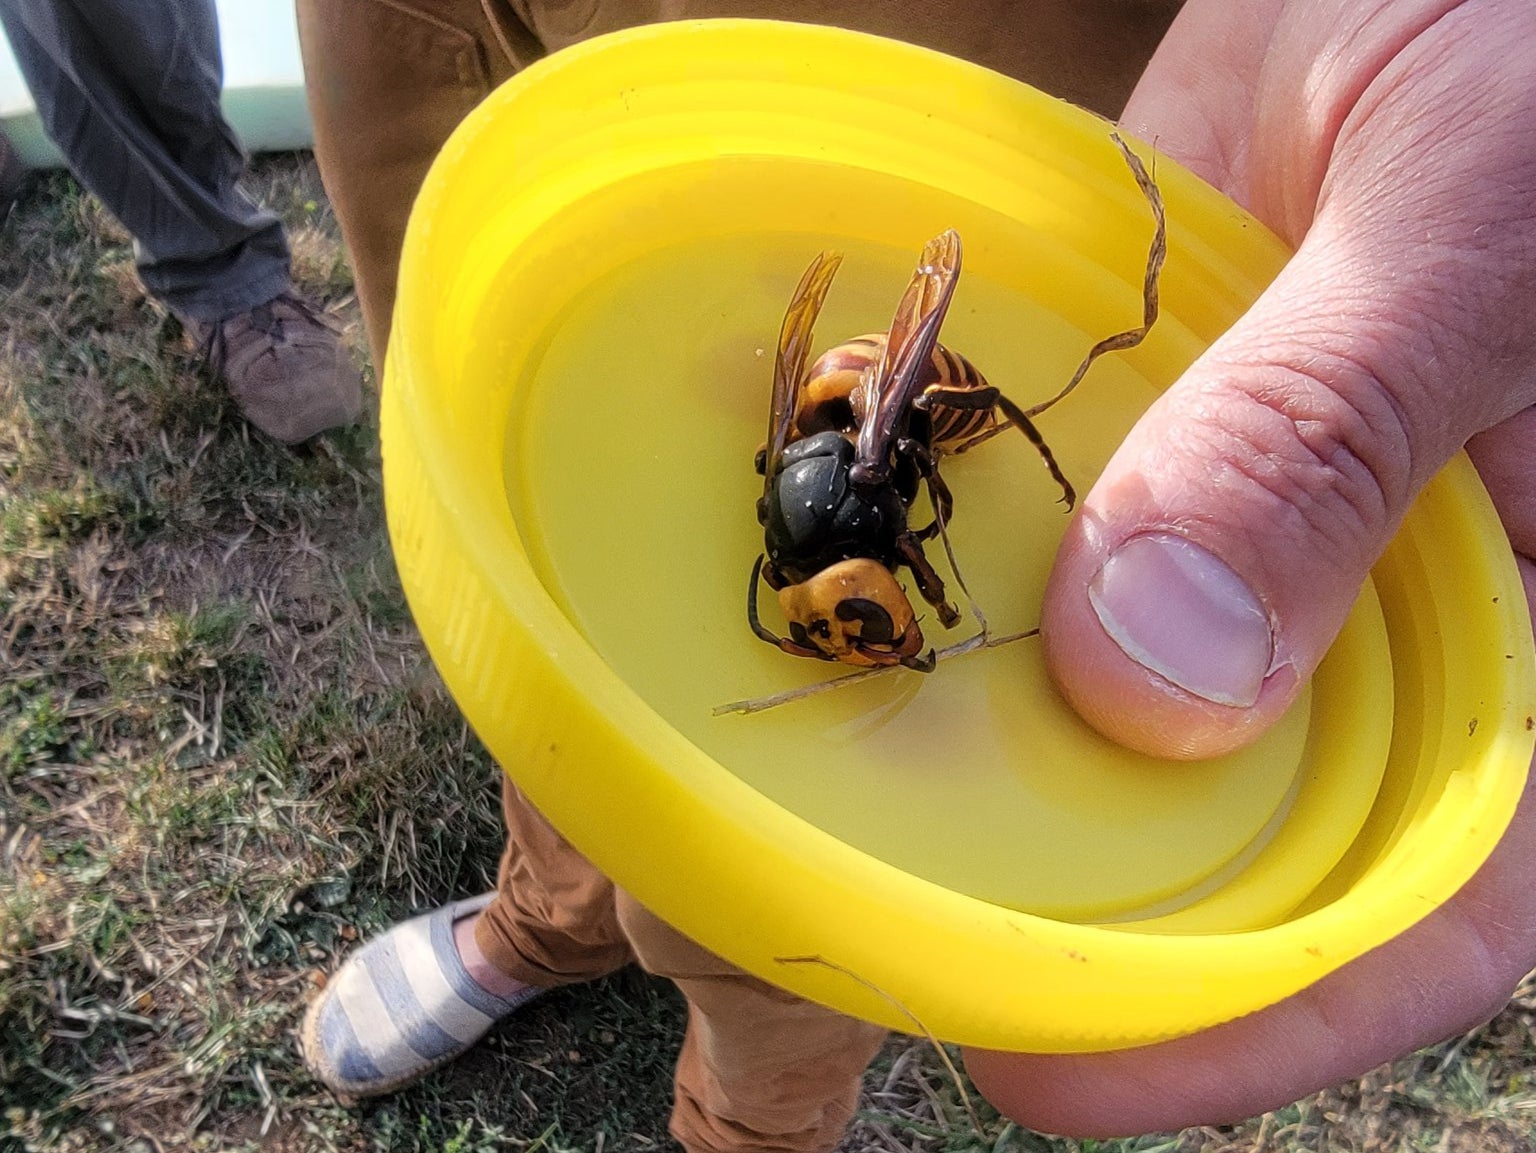 A Washington State Department of Agriculture worker holds an Asian giant hornet - often called “murder hornets” - after eradicating a nest in Washington state